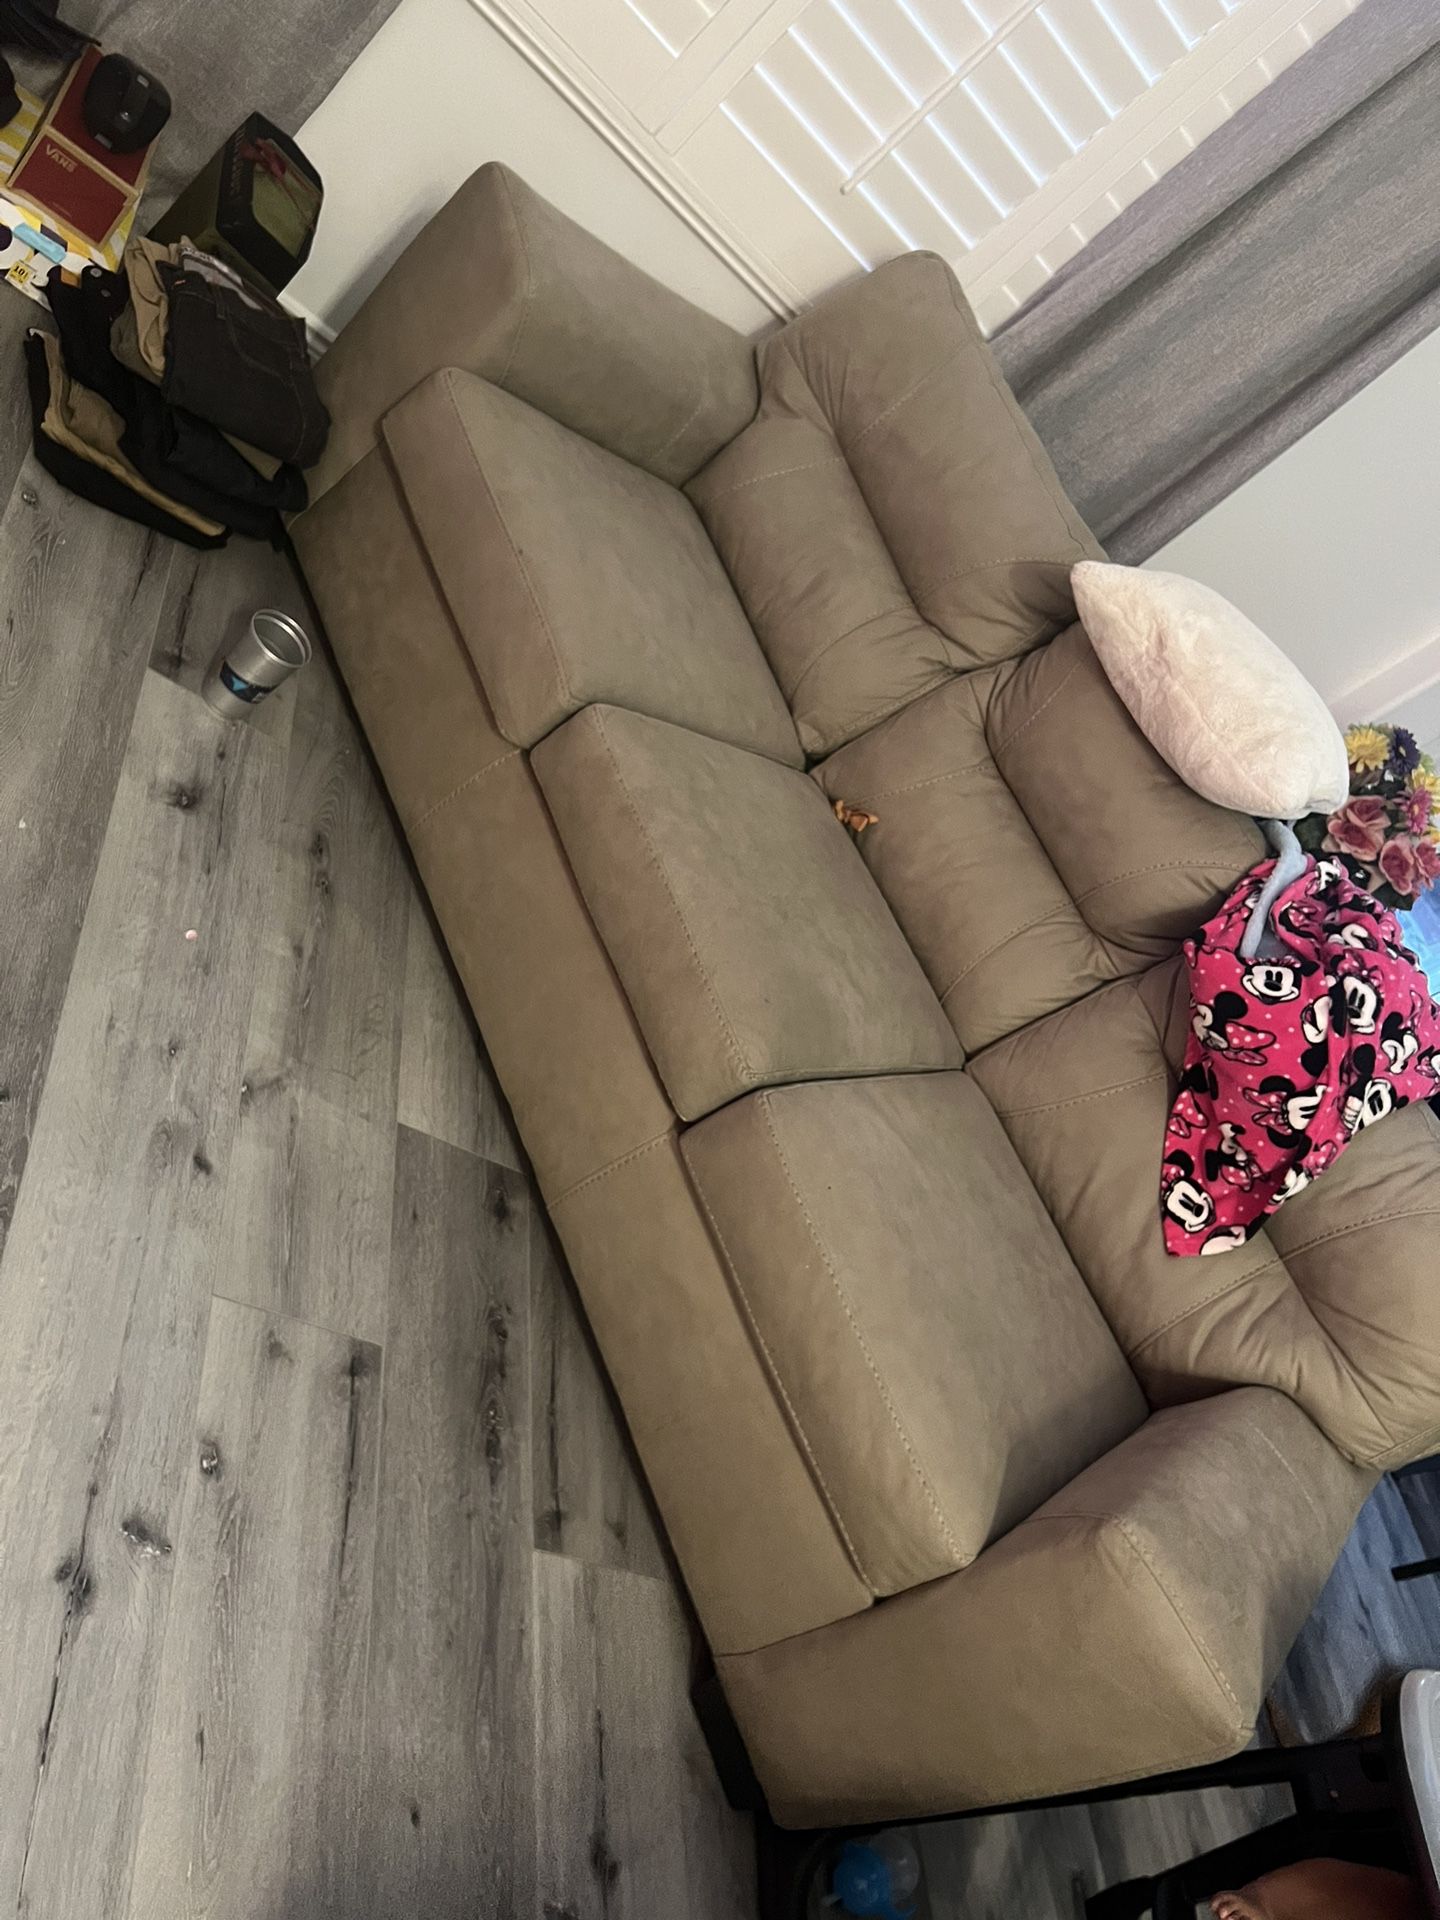 Clearance Sale !! Outdoor Patio Furniture- wicker Sofa Set. Brand new in  the box!!!! Cash Only. Pick up At San Bernardino, 92407. for Sale in  Corona, CA - OfferUp